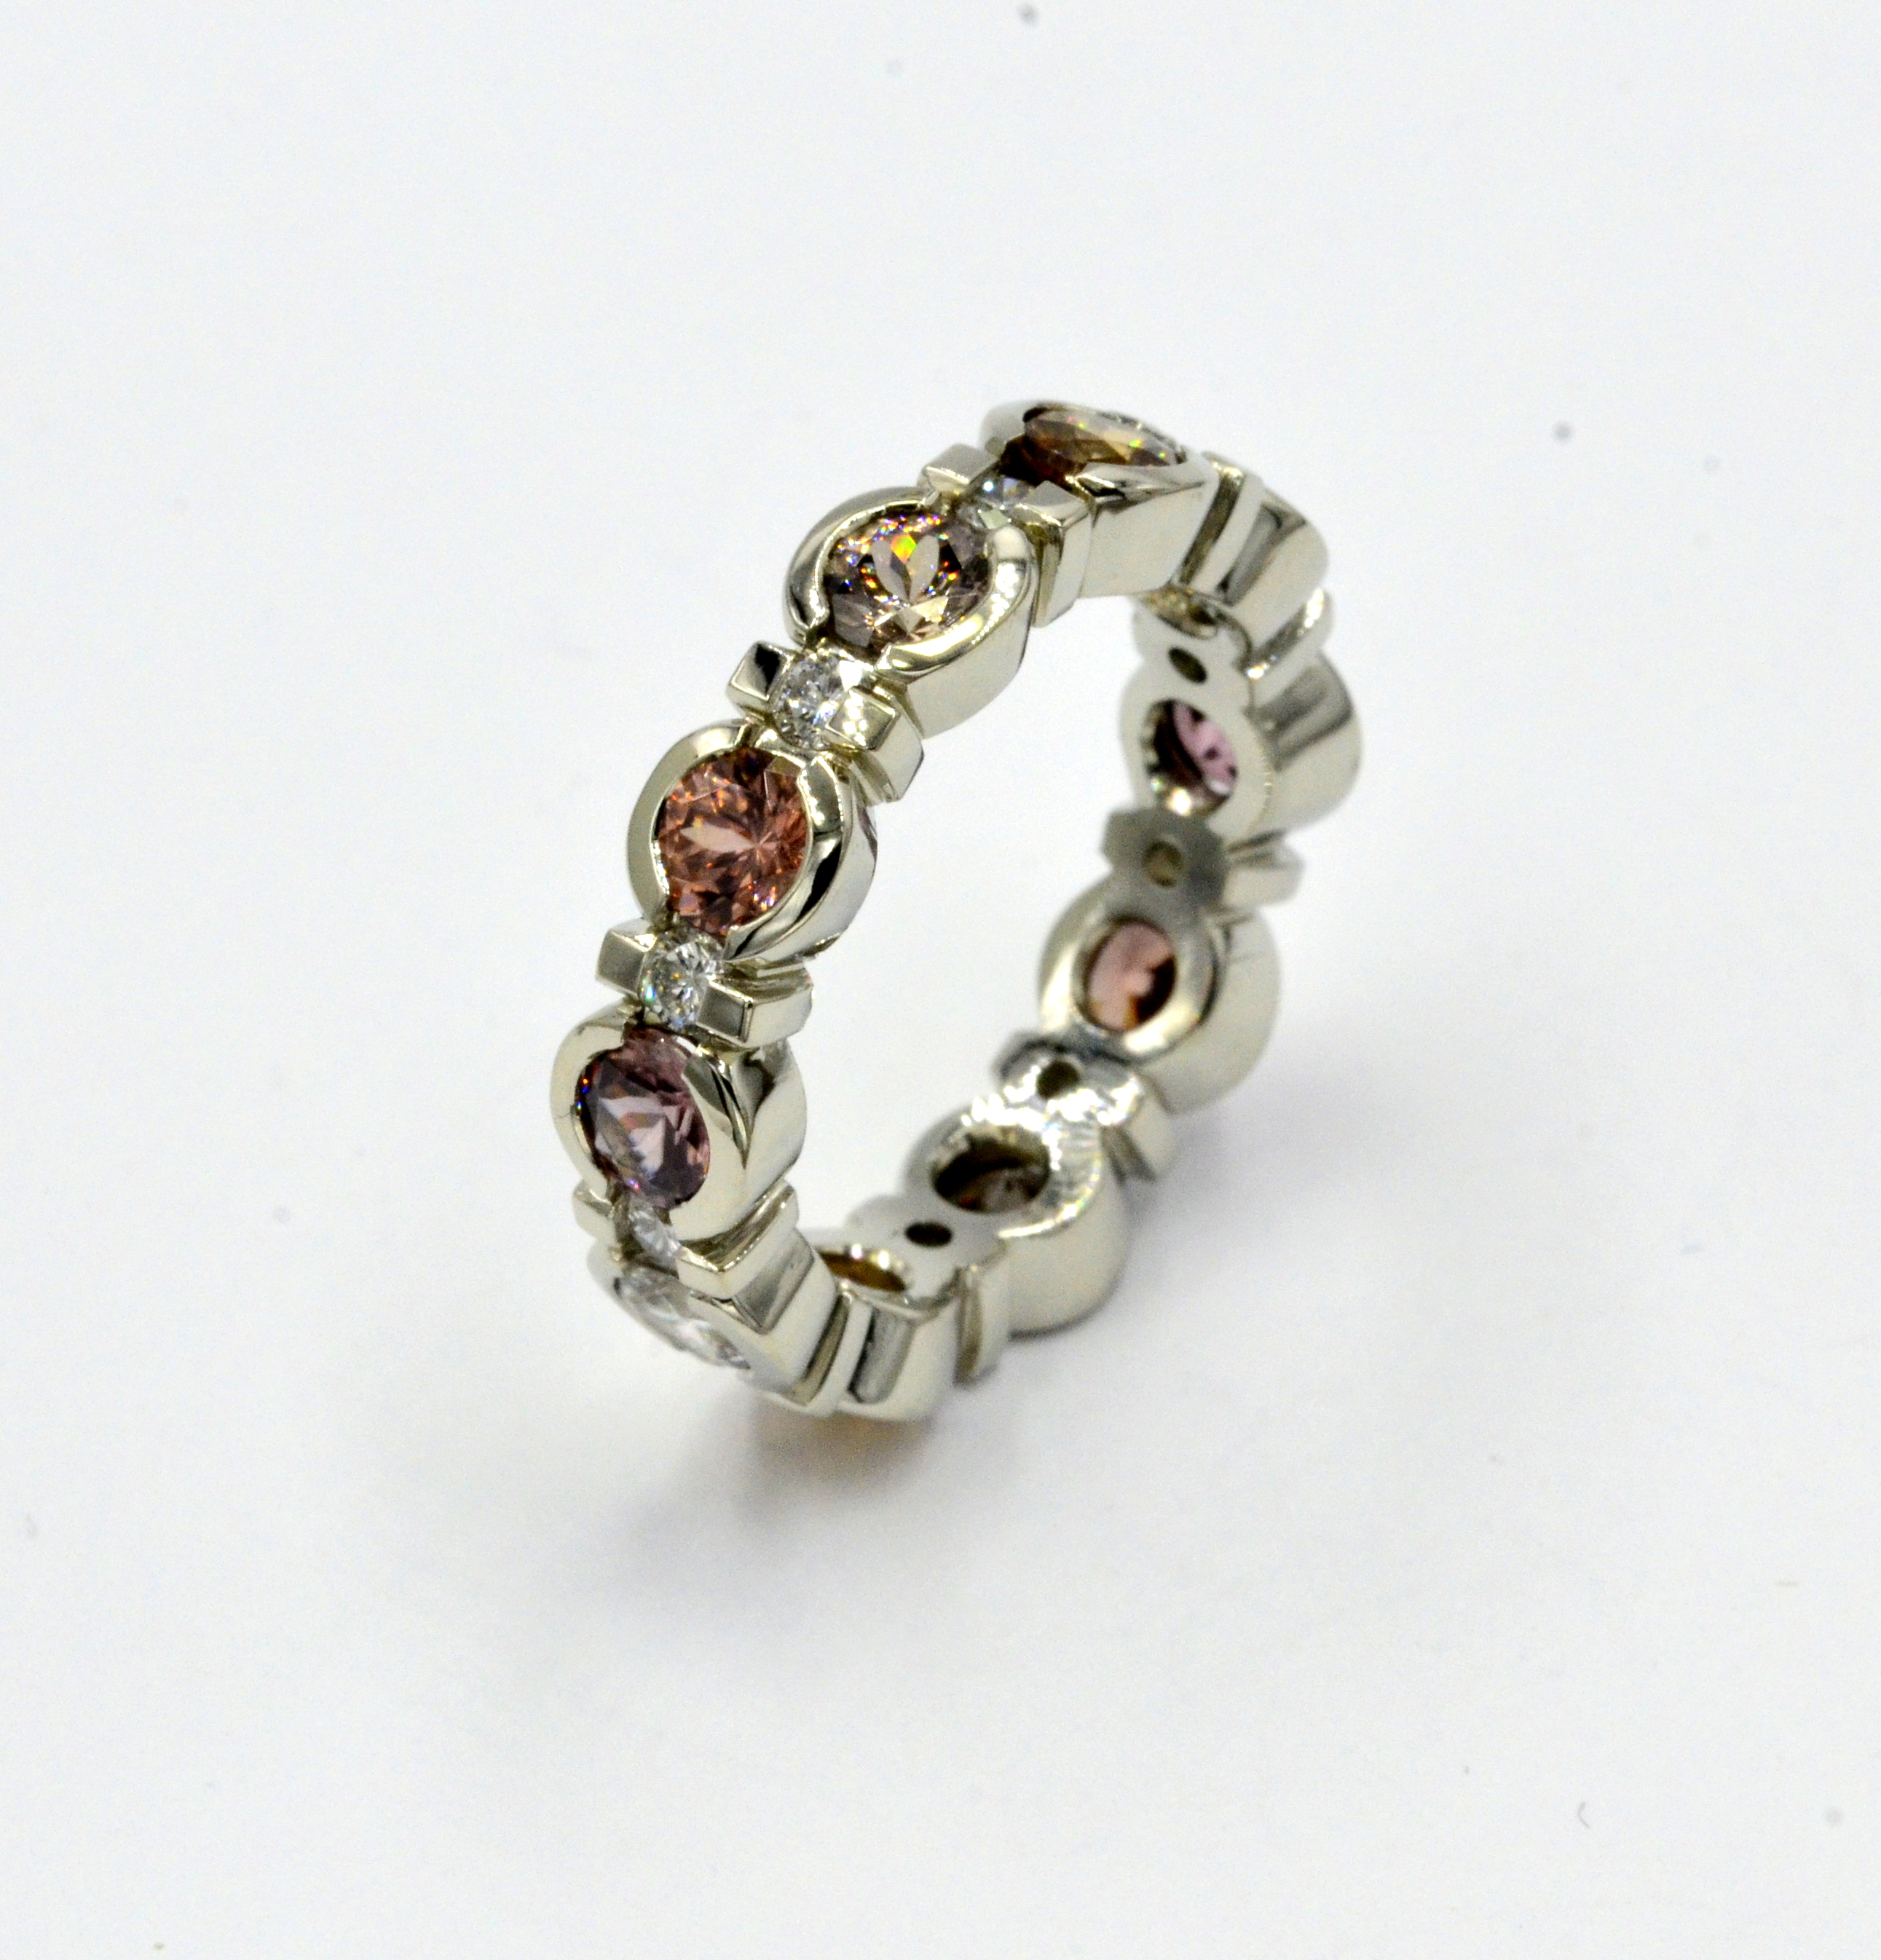 Eternity band with Zircon Gemstones ranging in color from Golden Champagne to shades of Rose Pink Copper. Ring is size 6 + , could be sized up to a 6.25 + max.